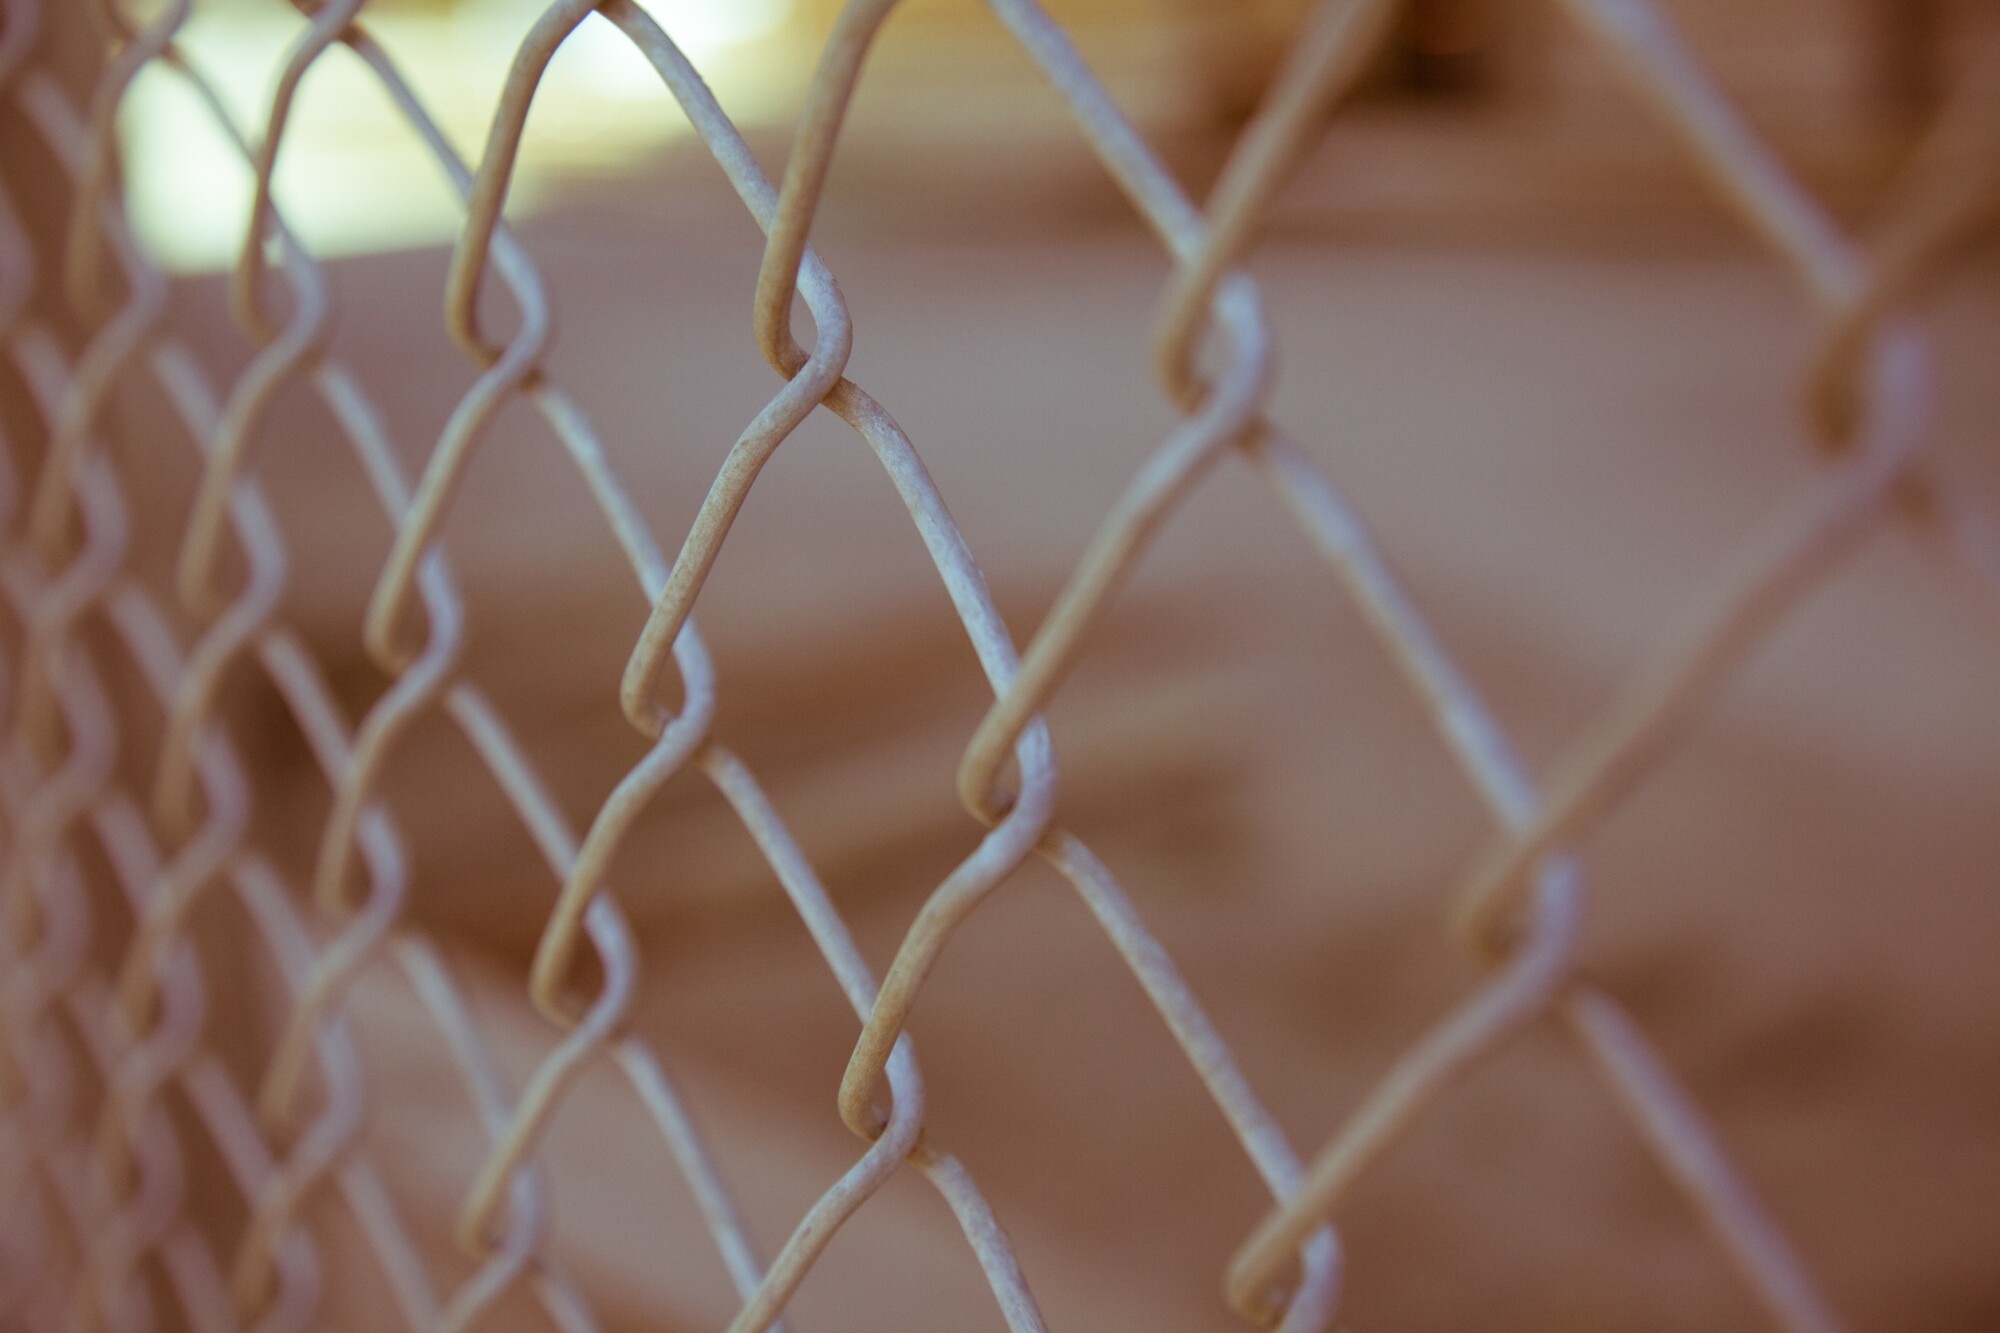 The Most Popular Chain Link Fence Colors, Revealed